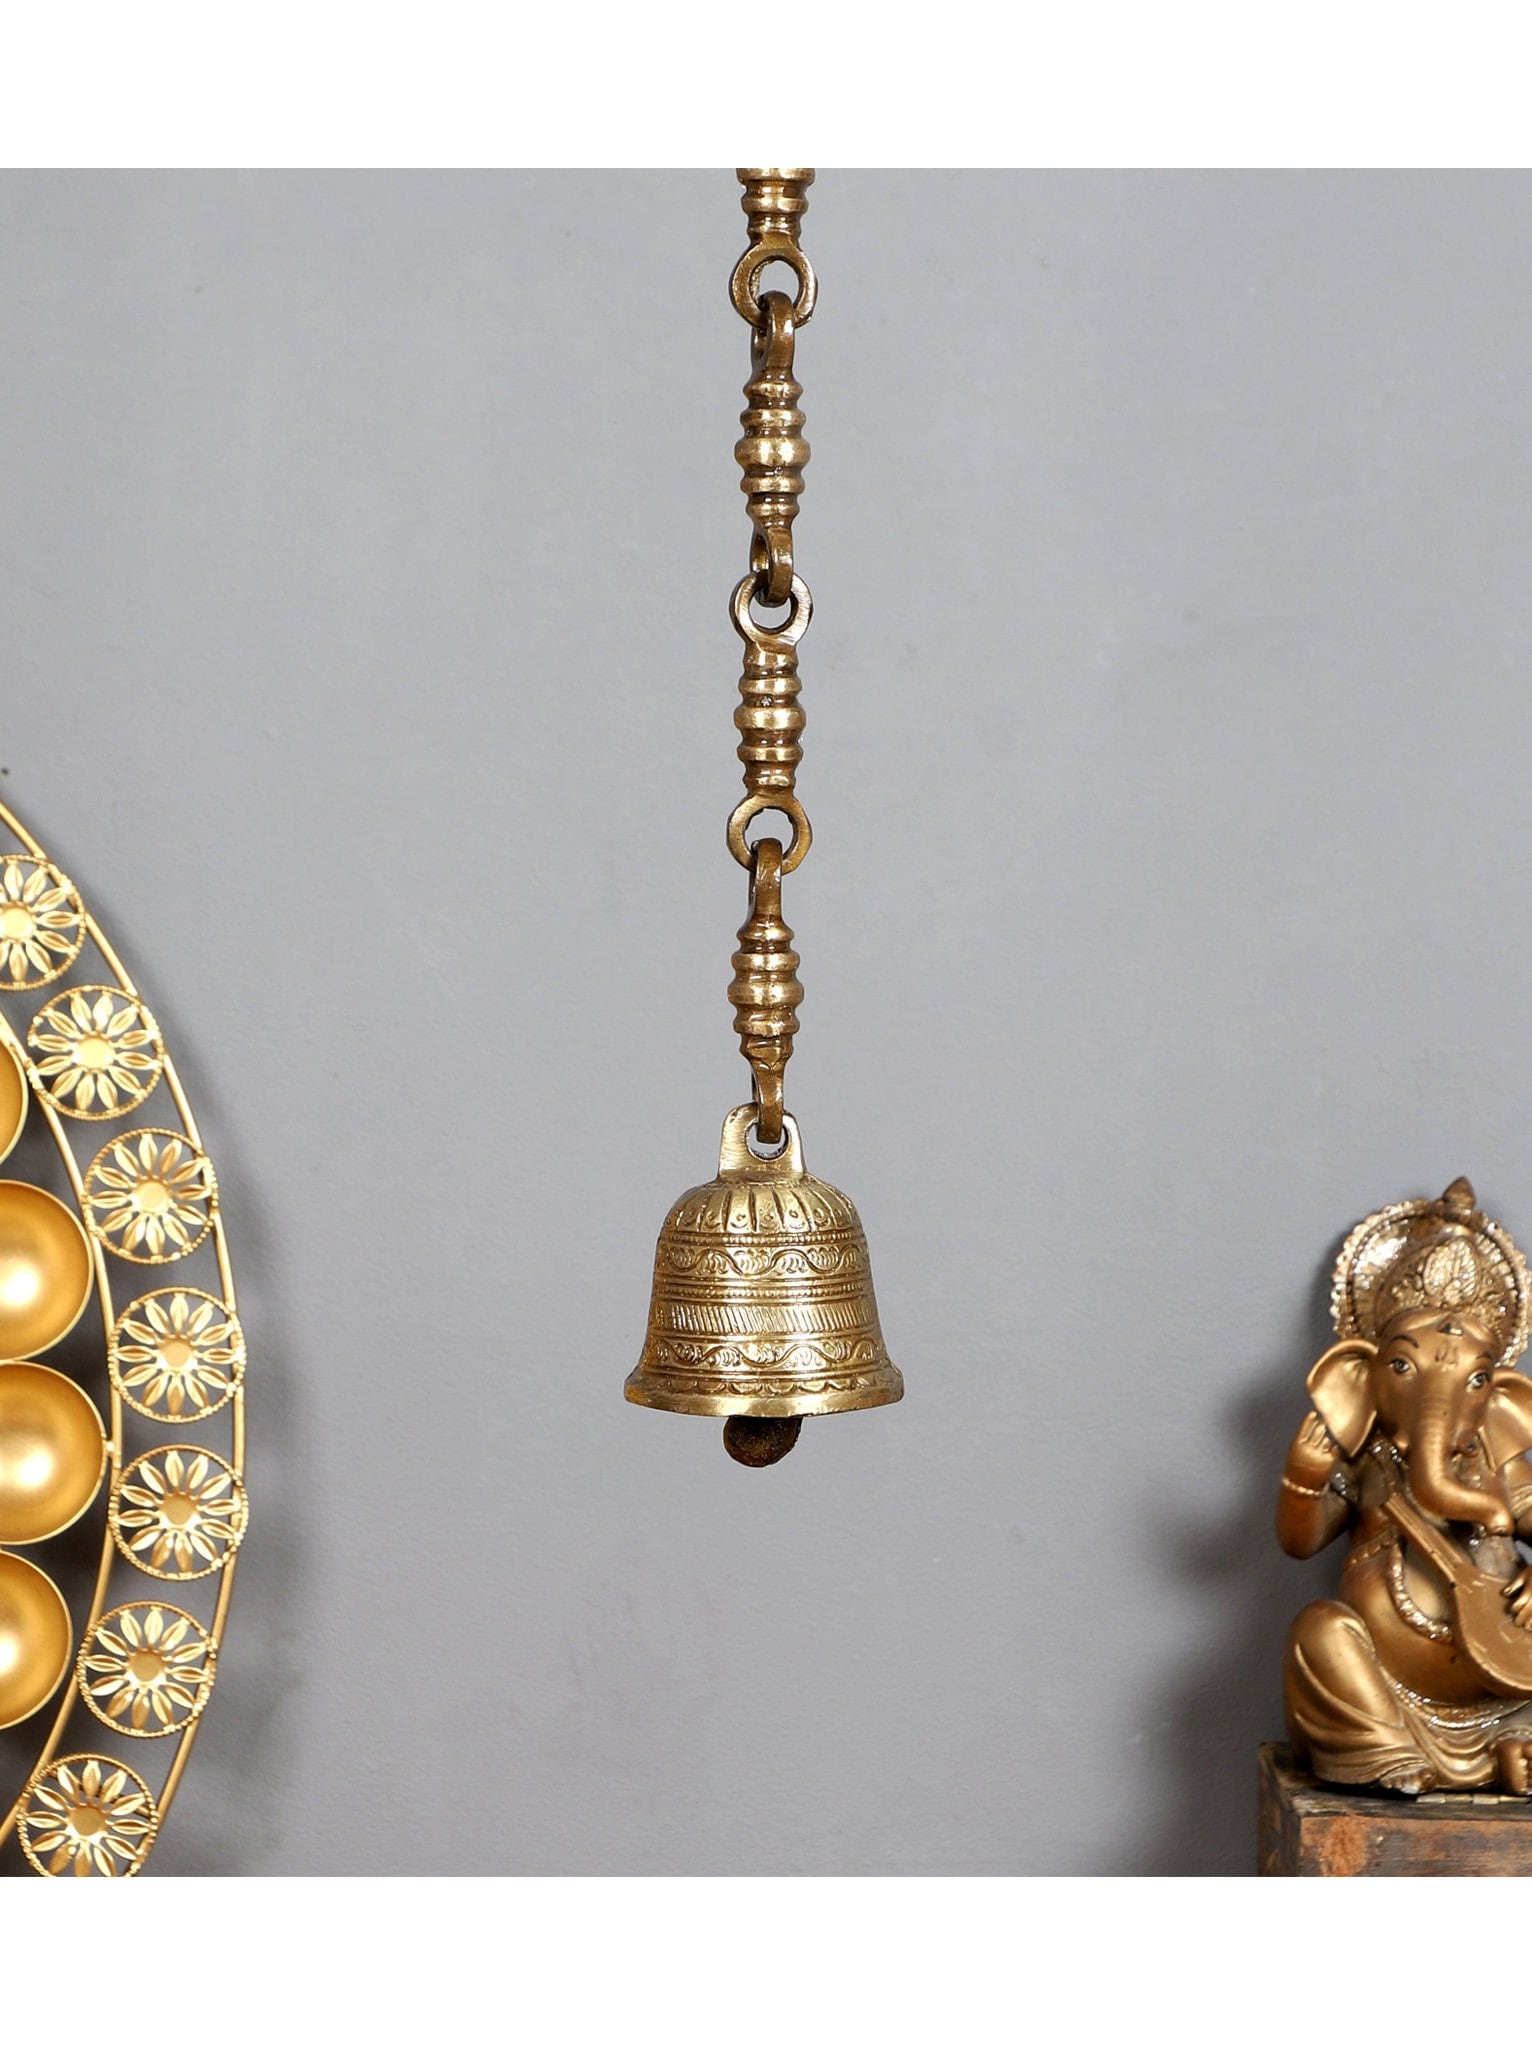 Buy Brass Temple Hanging Bell, Brass Bells for Temple, Indian Home